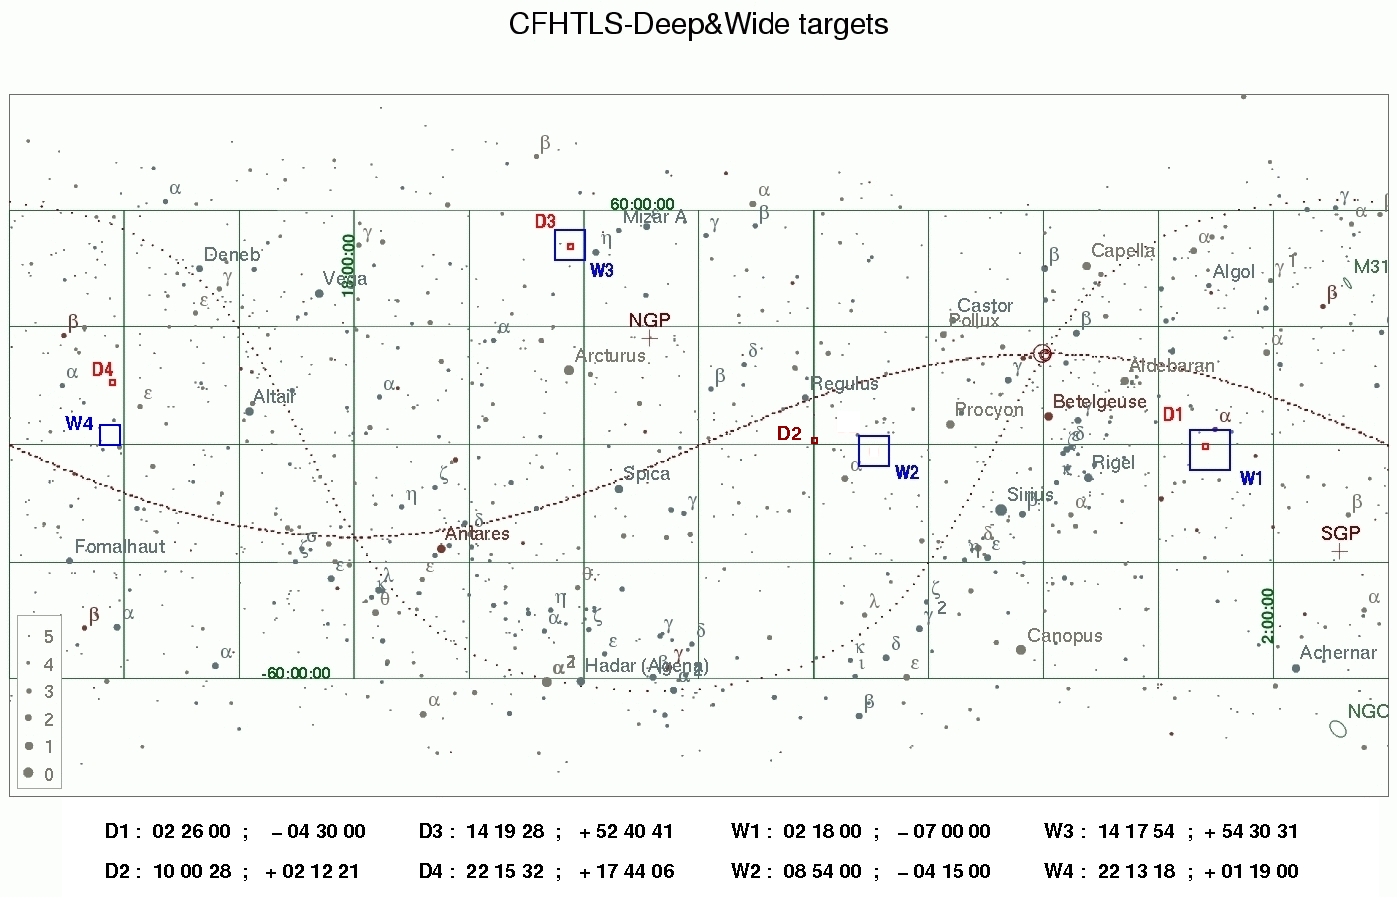 CFHTLS: W1, W2 and W3 targets